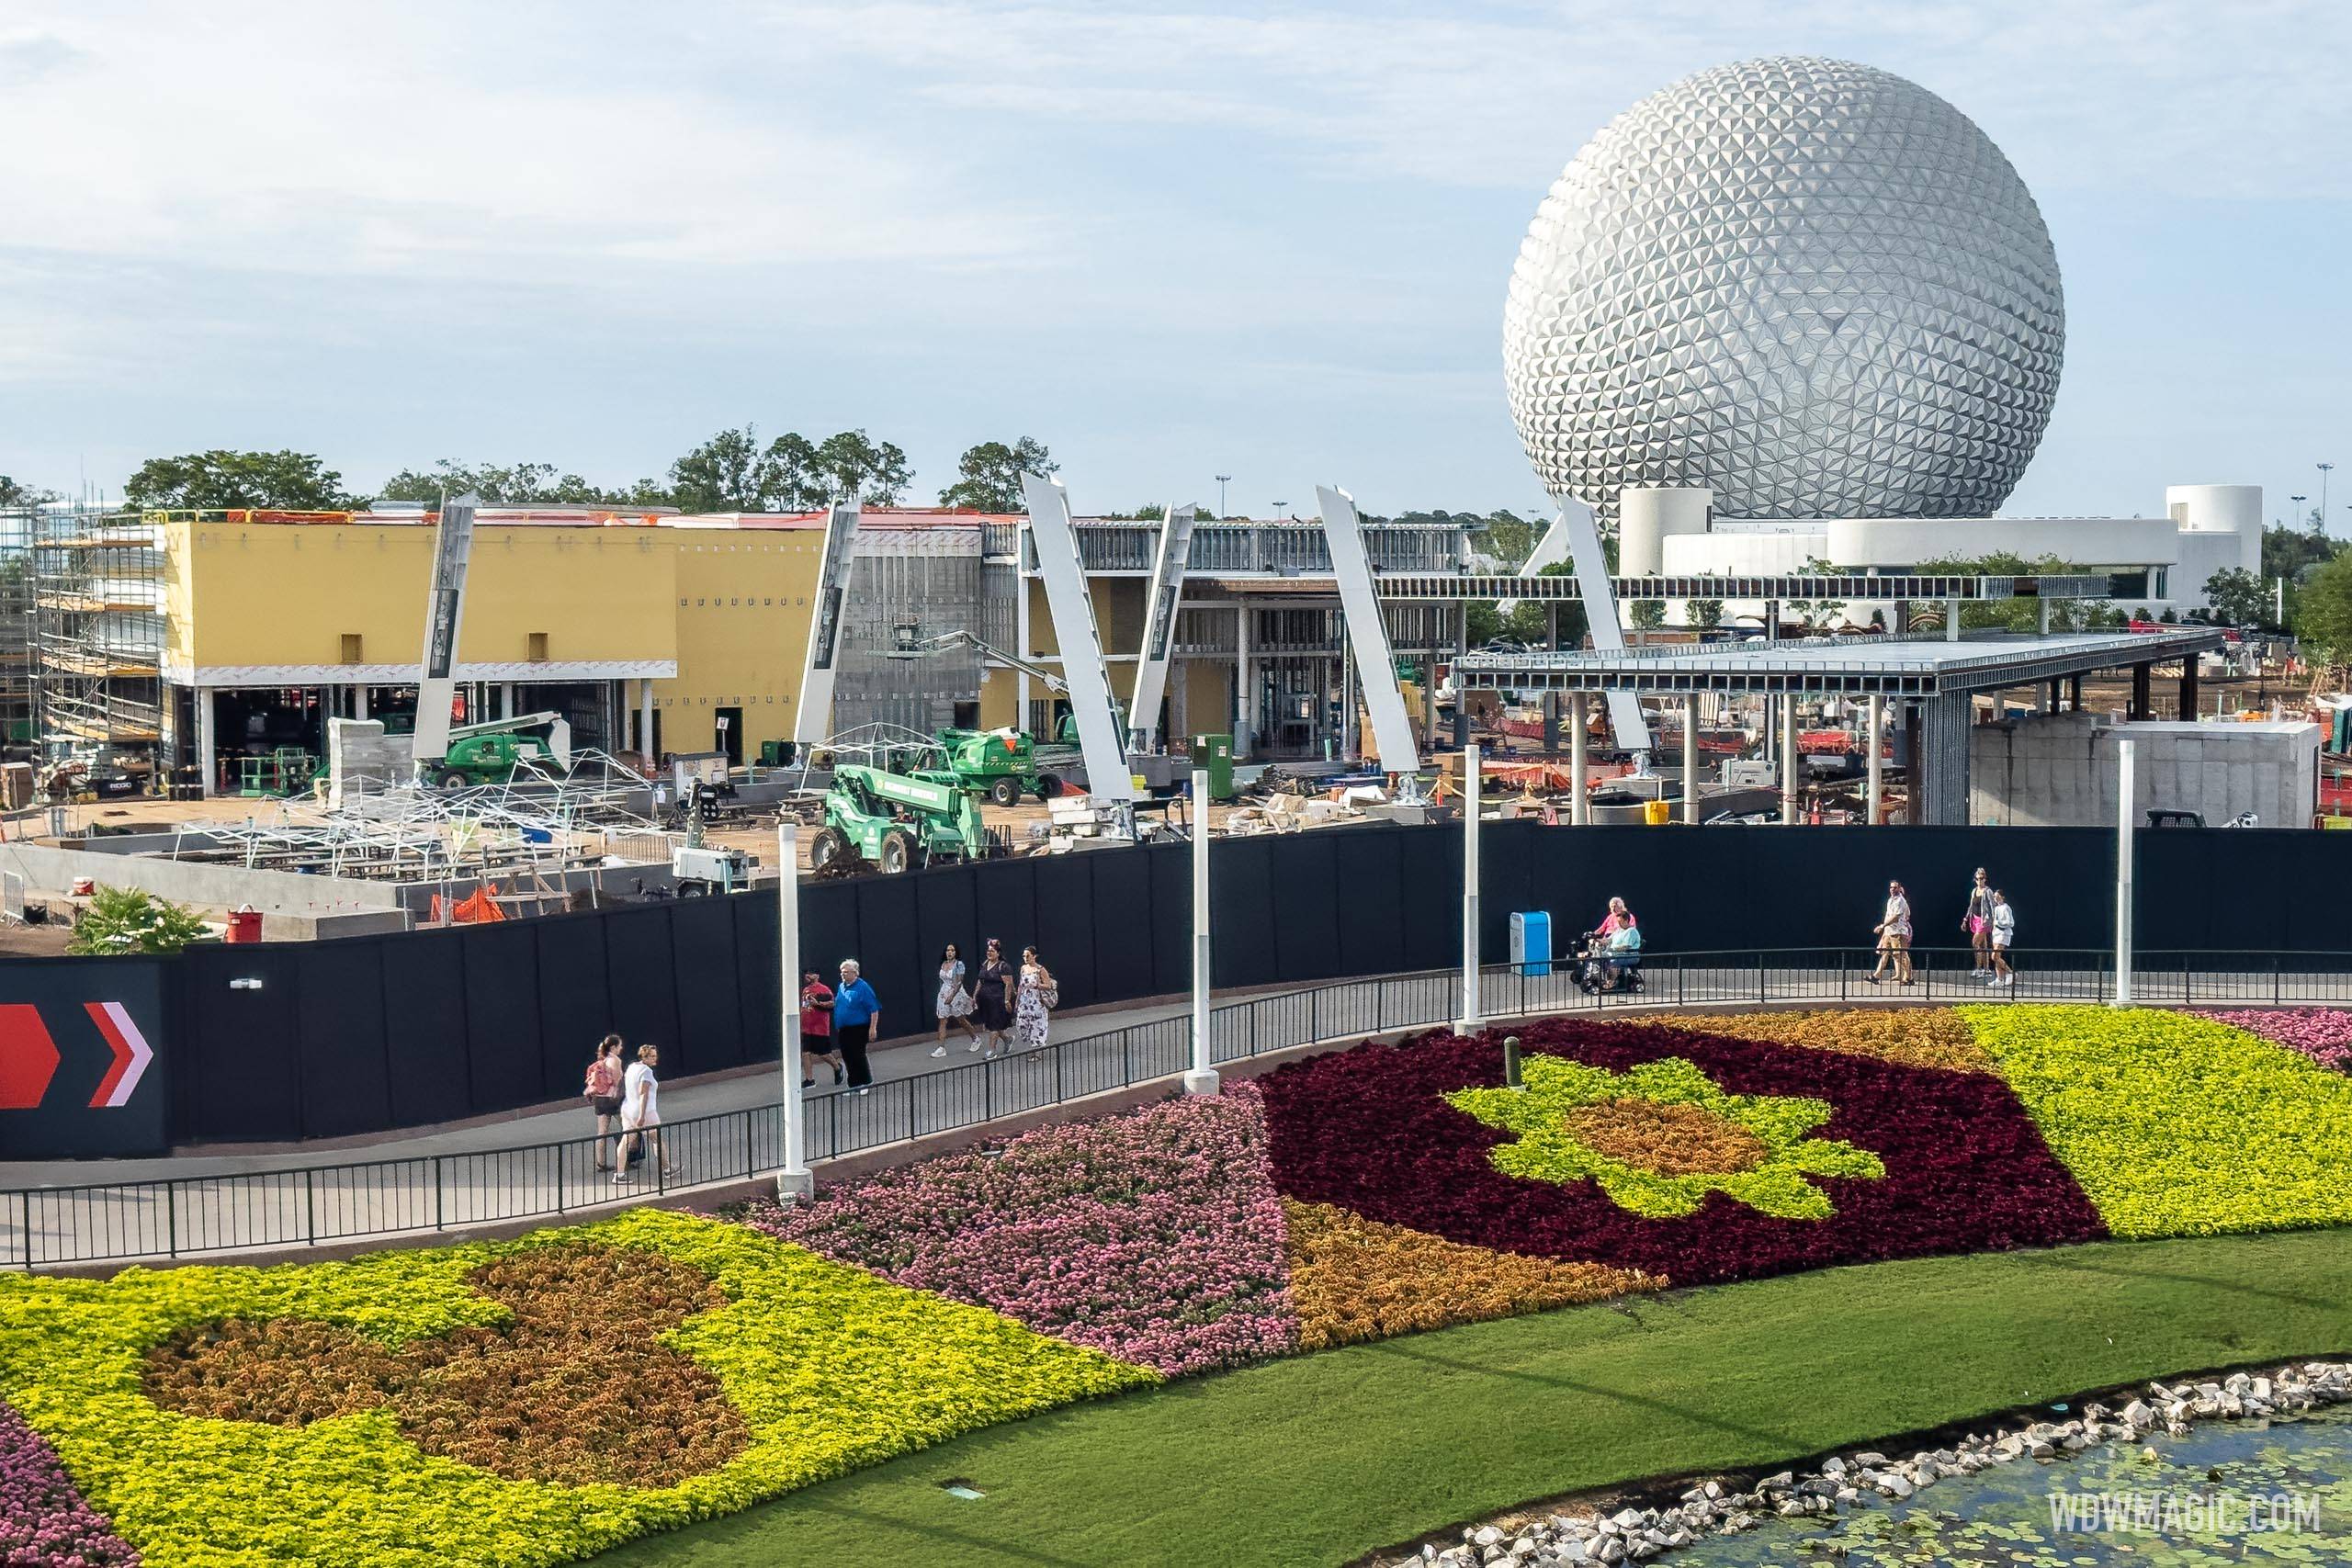 Massive lighting towers added in World Celebration at EPCOT